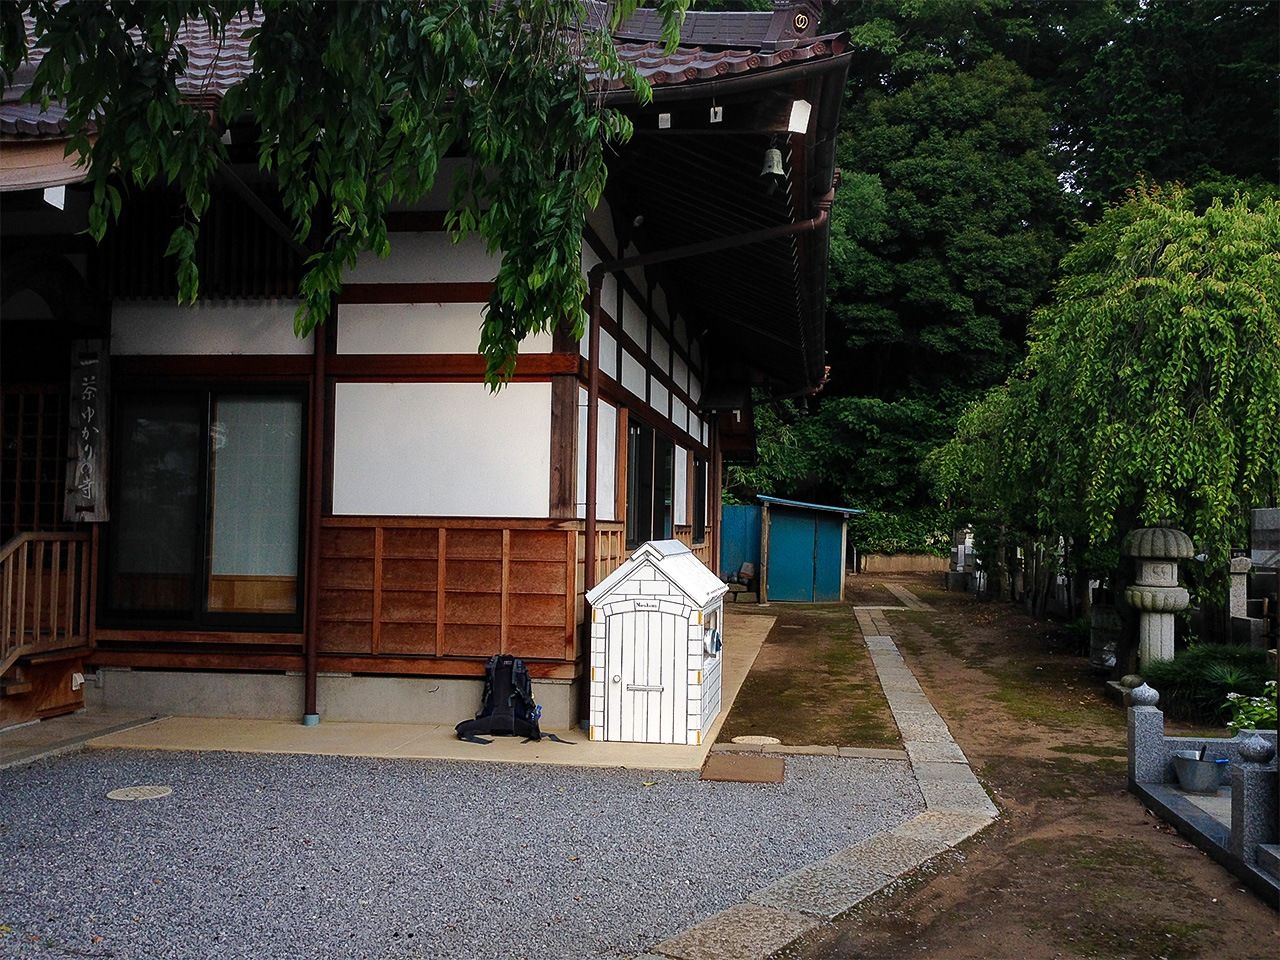 On the grounds of a temple in Nagareyama, Chiba (June 7, 2015).